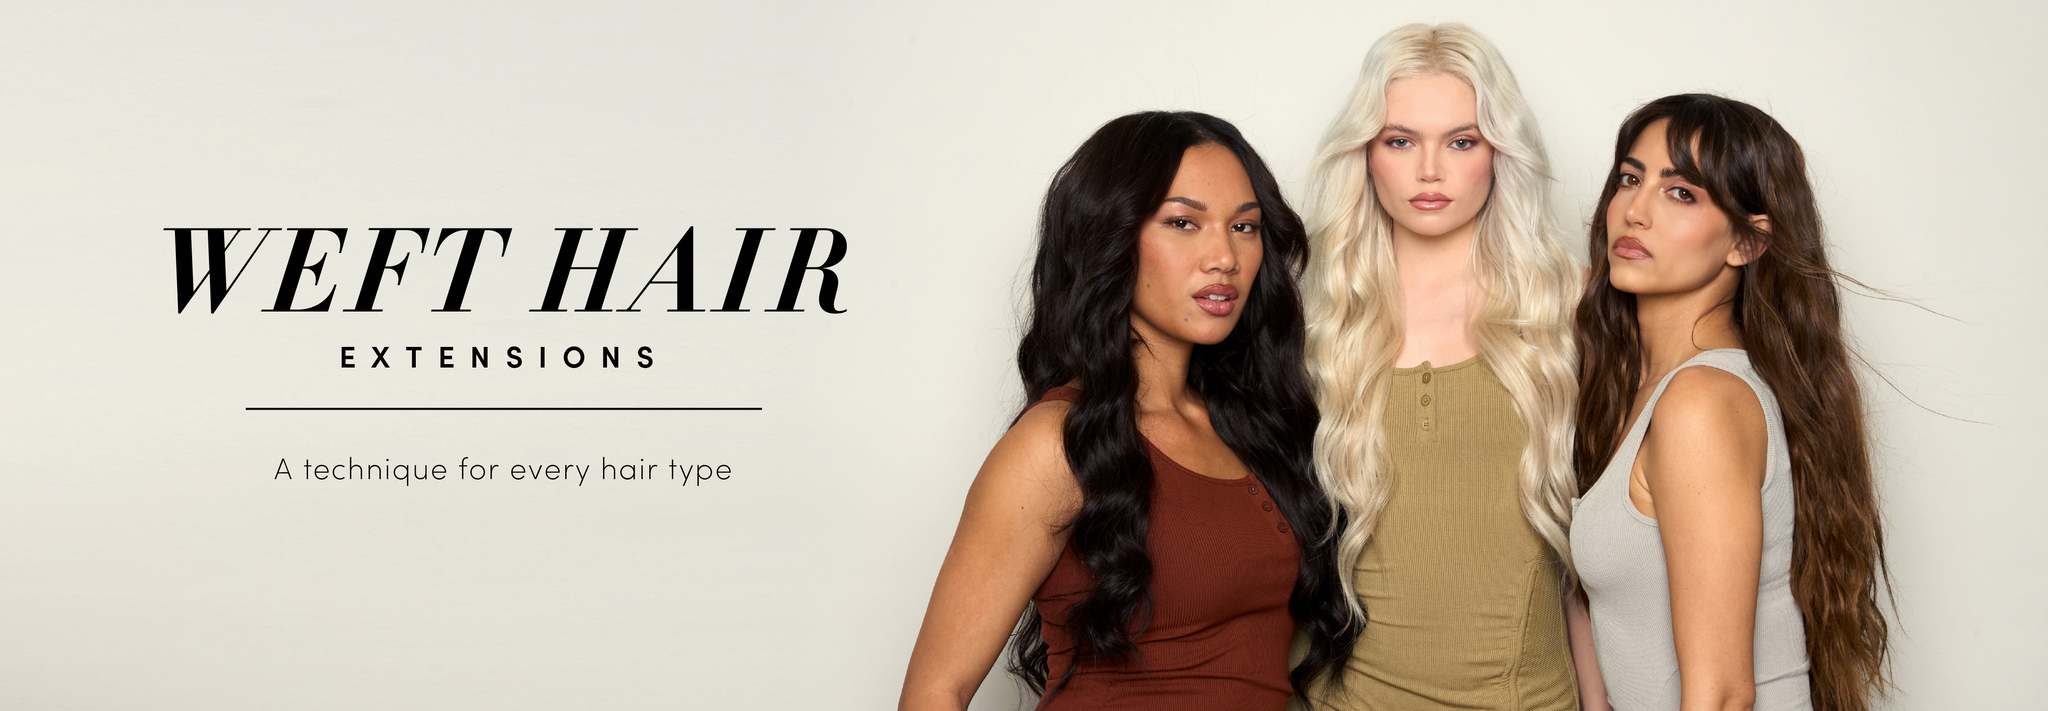 3 women standing together posing for the camera with text that reads "Weft Hair Extensions. A technique for every hair type"